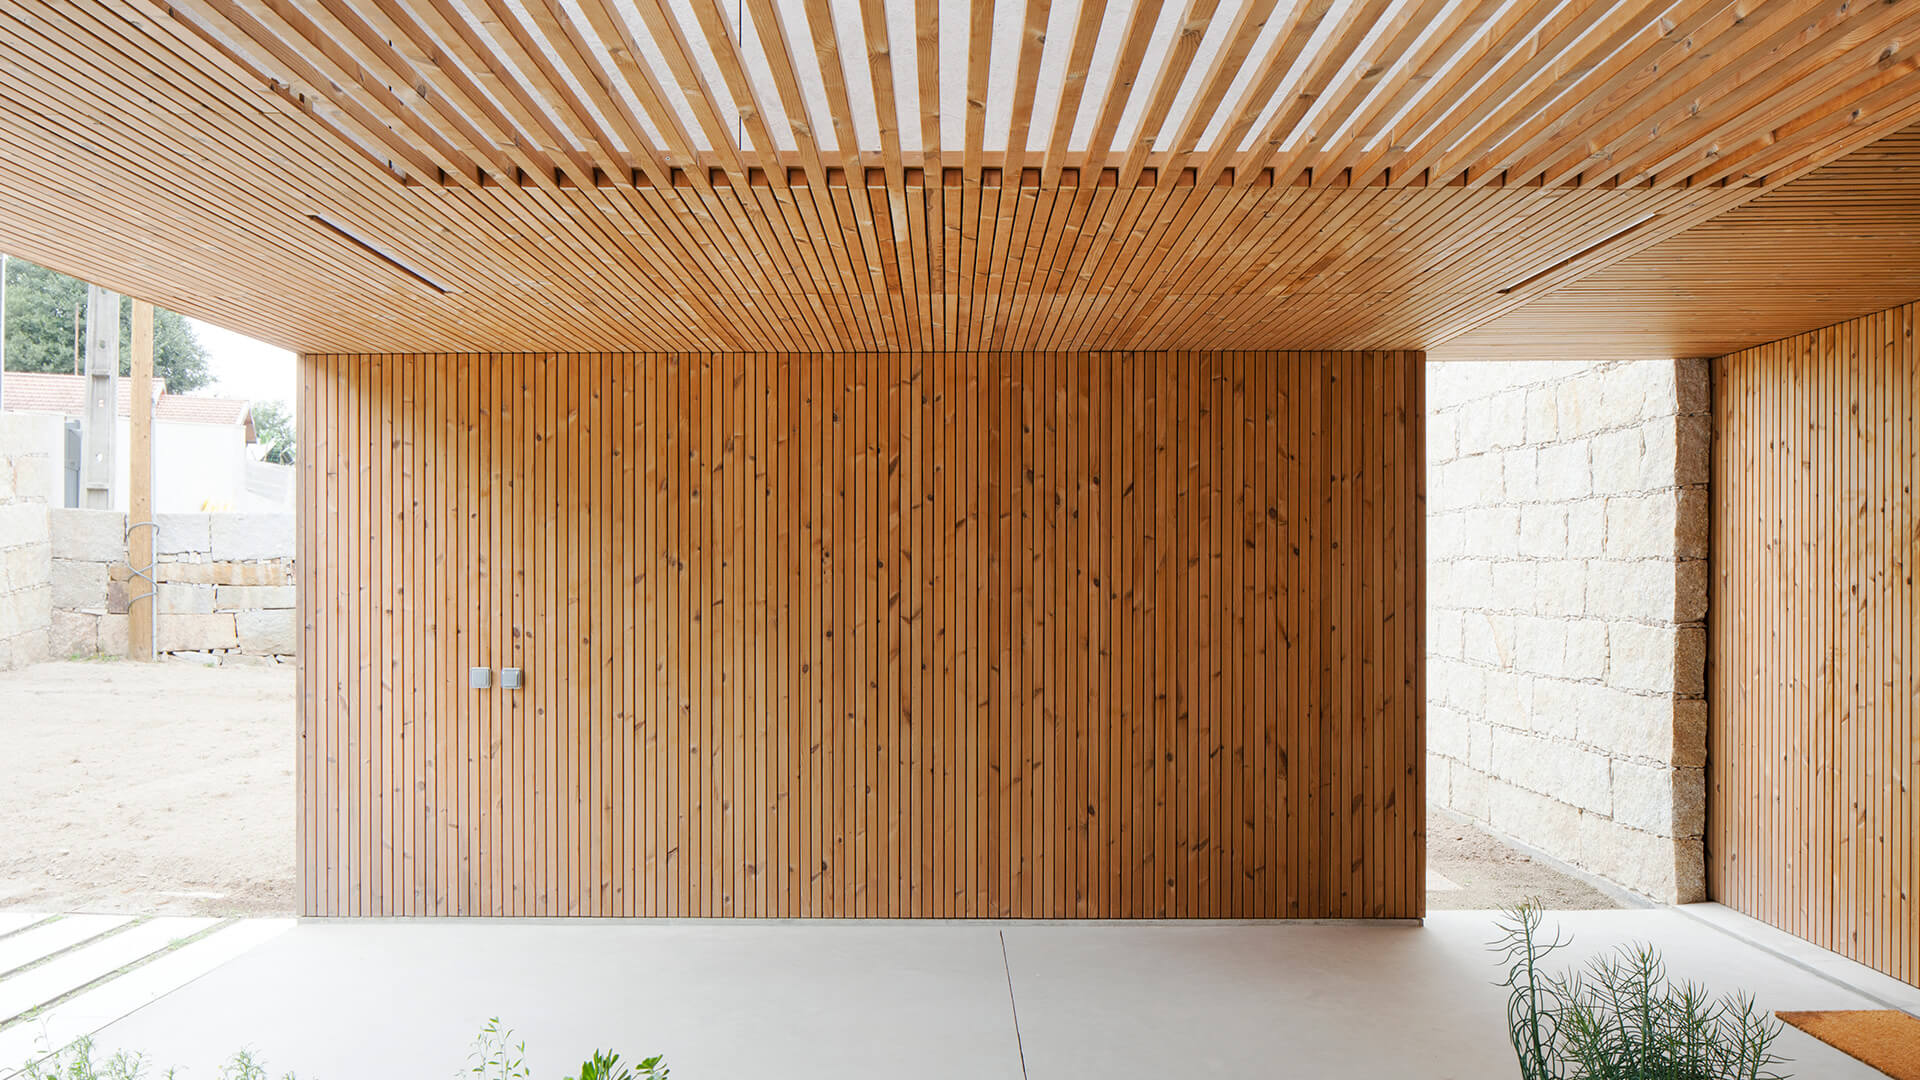 Wood cladding products that can stand the test of time - Archpaper.com